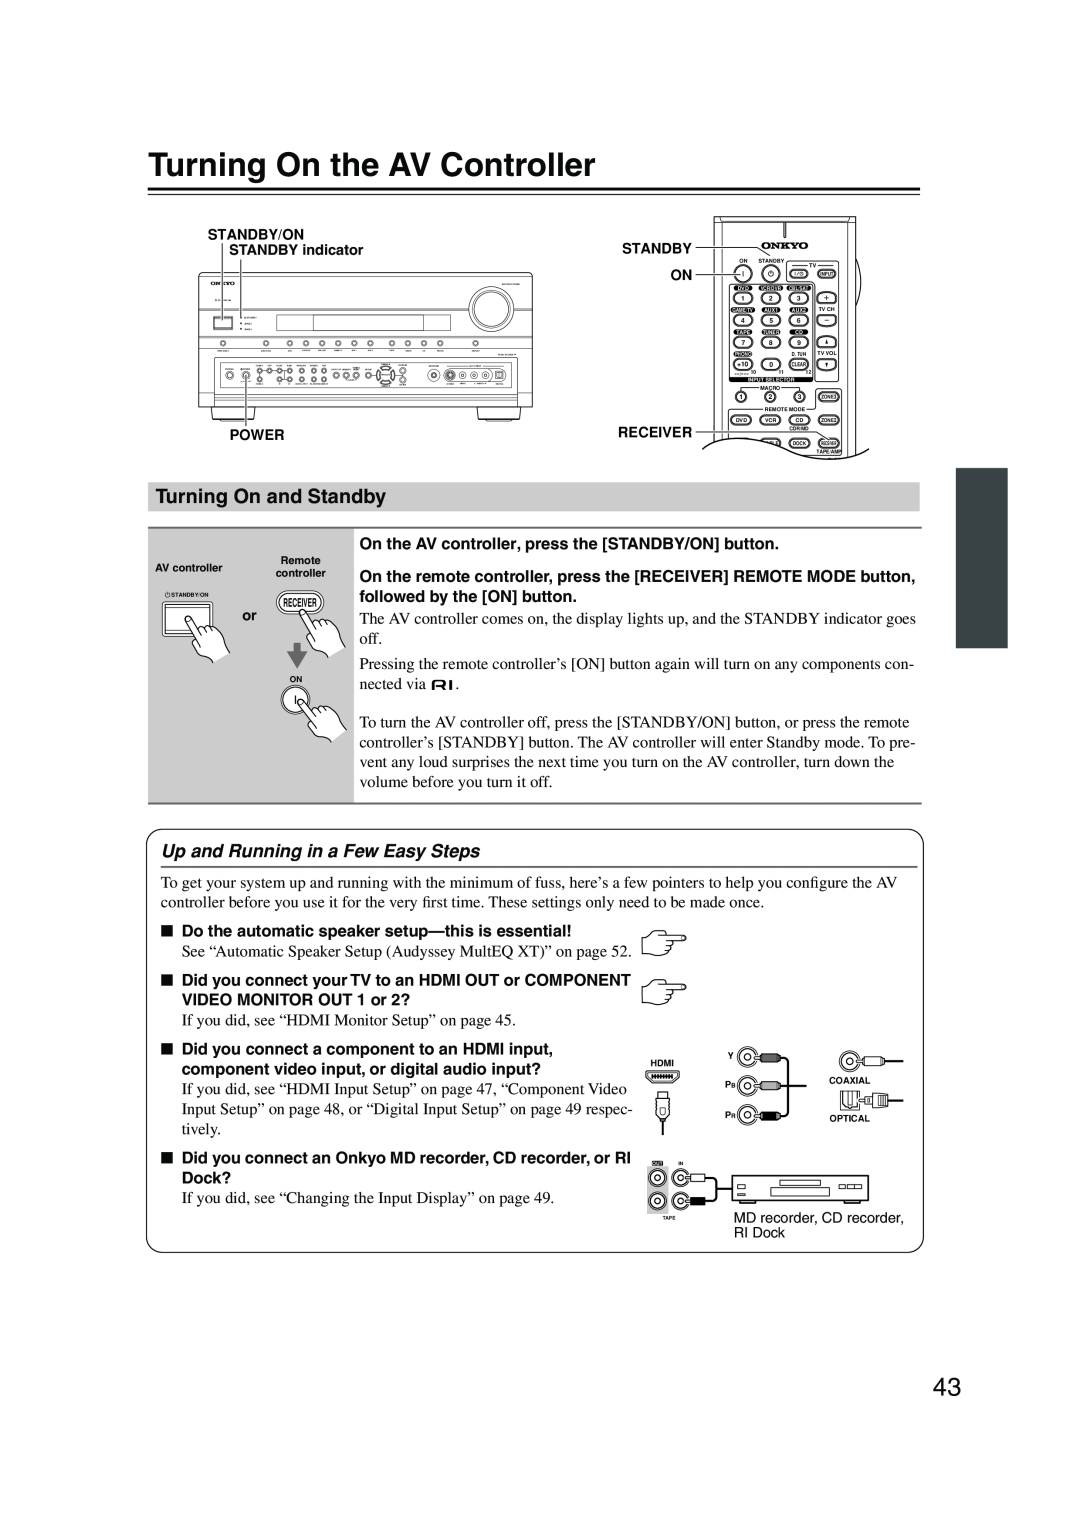 Onkyo PR-SC885 instruction manual Turning On the AV Controller, Turning On and Standby, Up and Running in a Few Easy Steps 